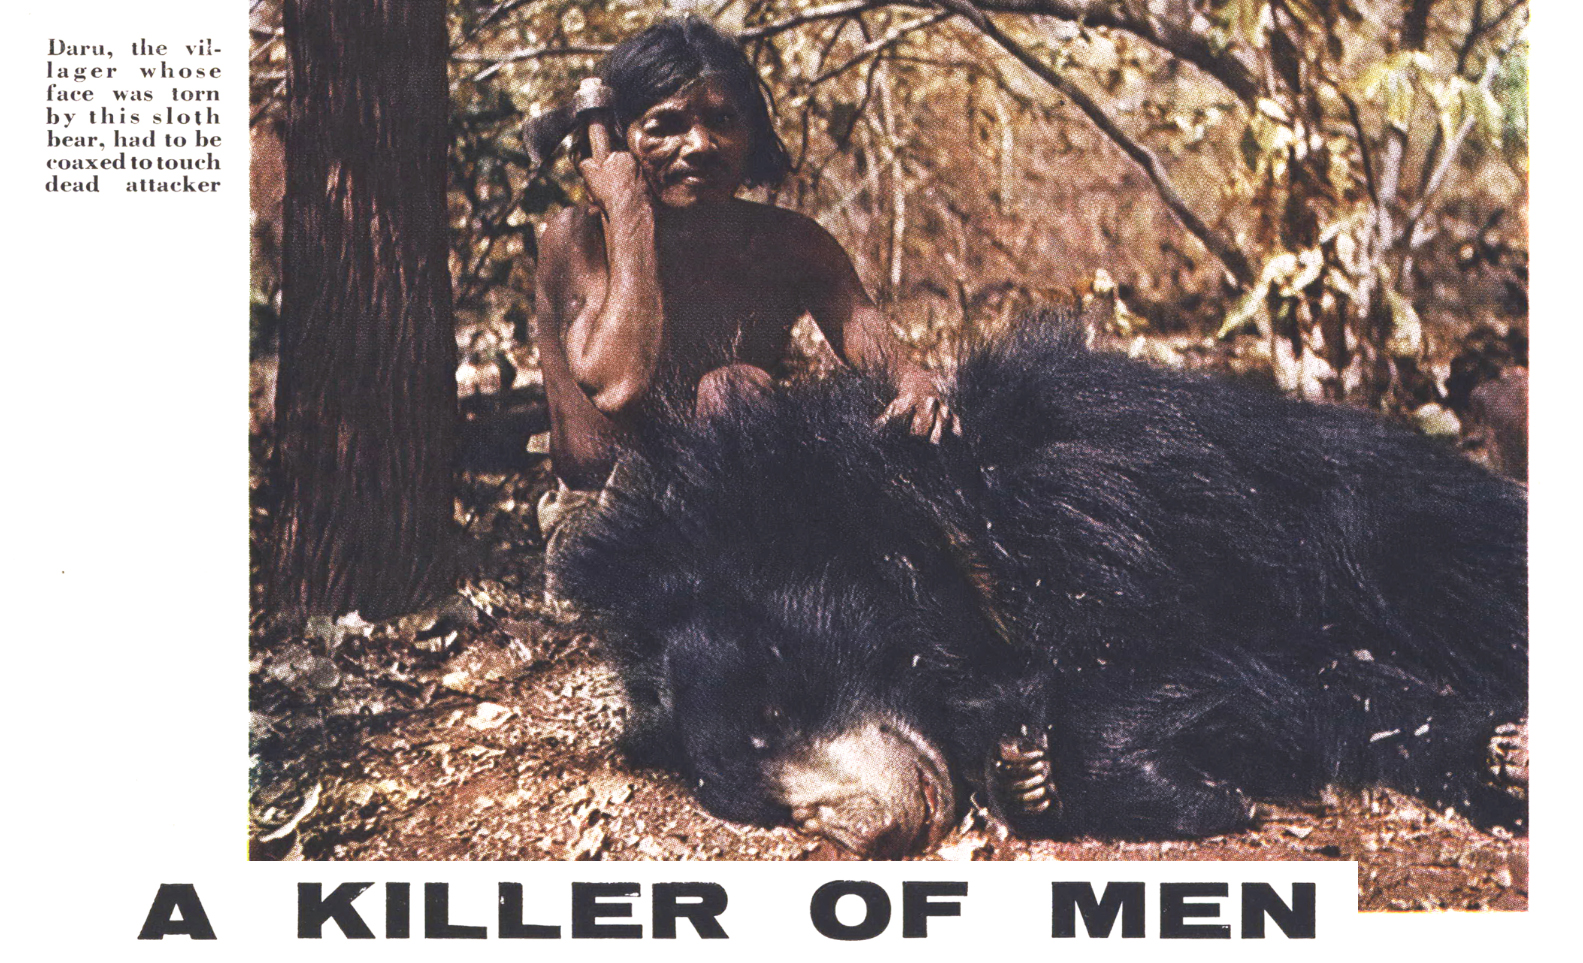 A Killer of Men: The Story of a Deadly Sloth Bear, From the Archives